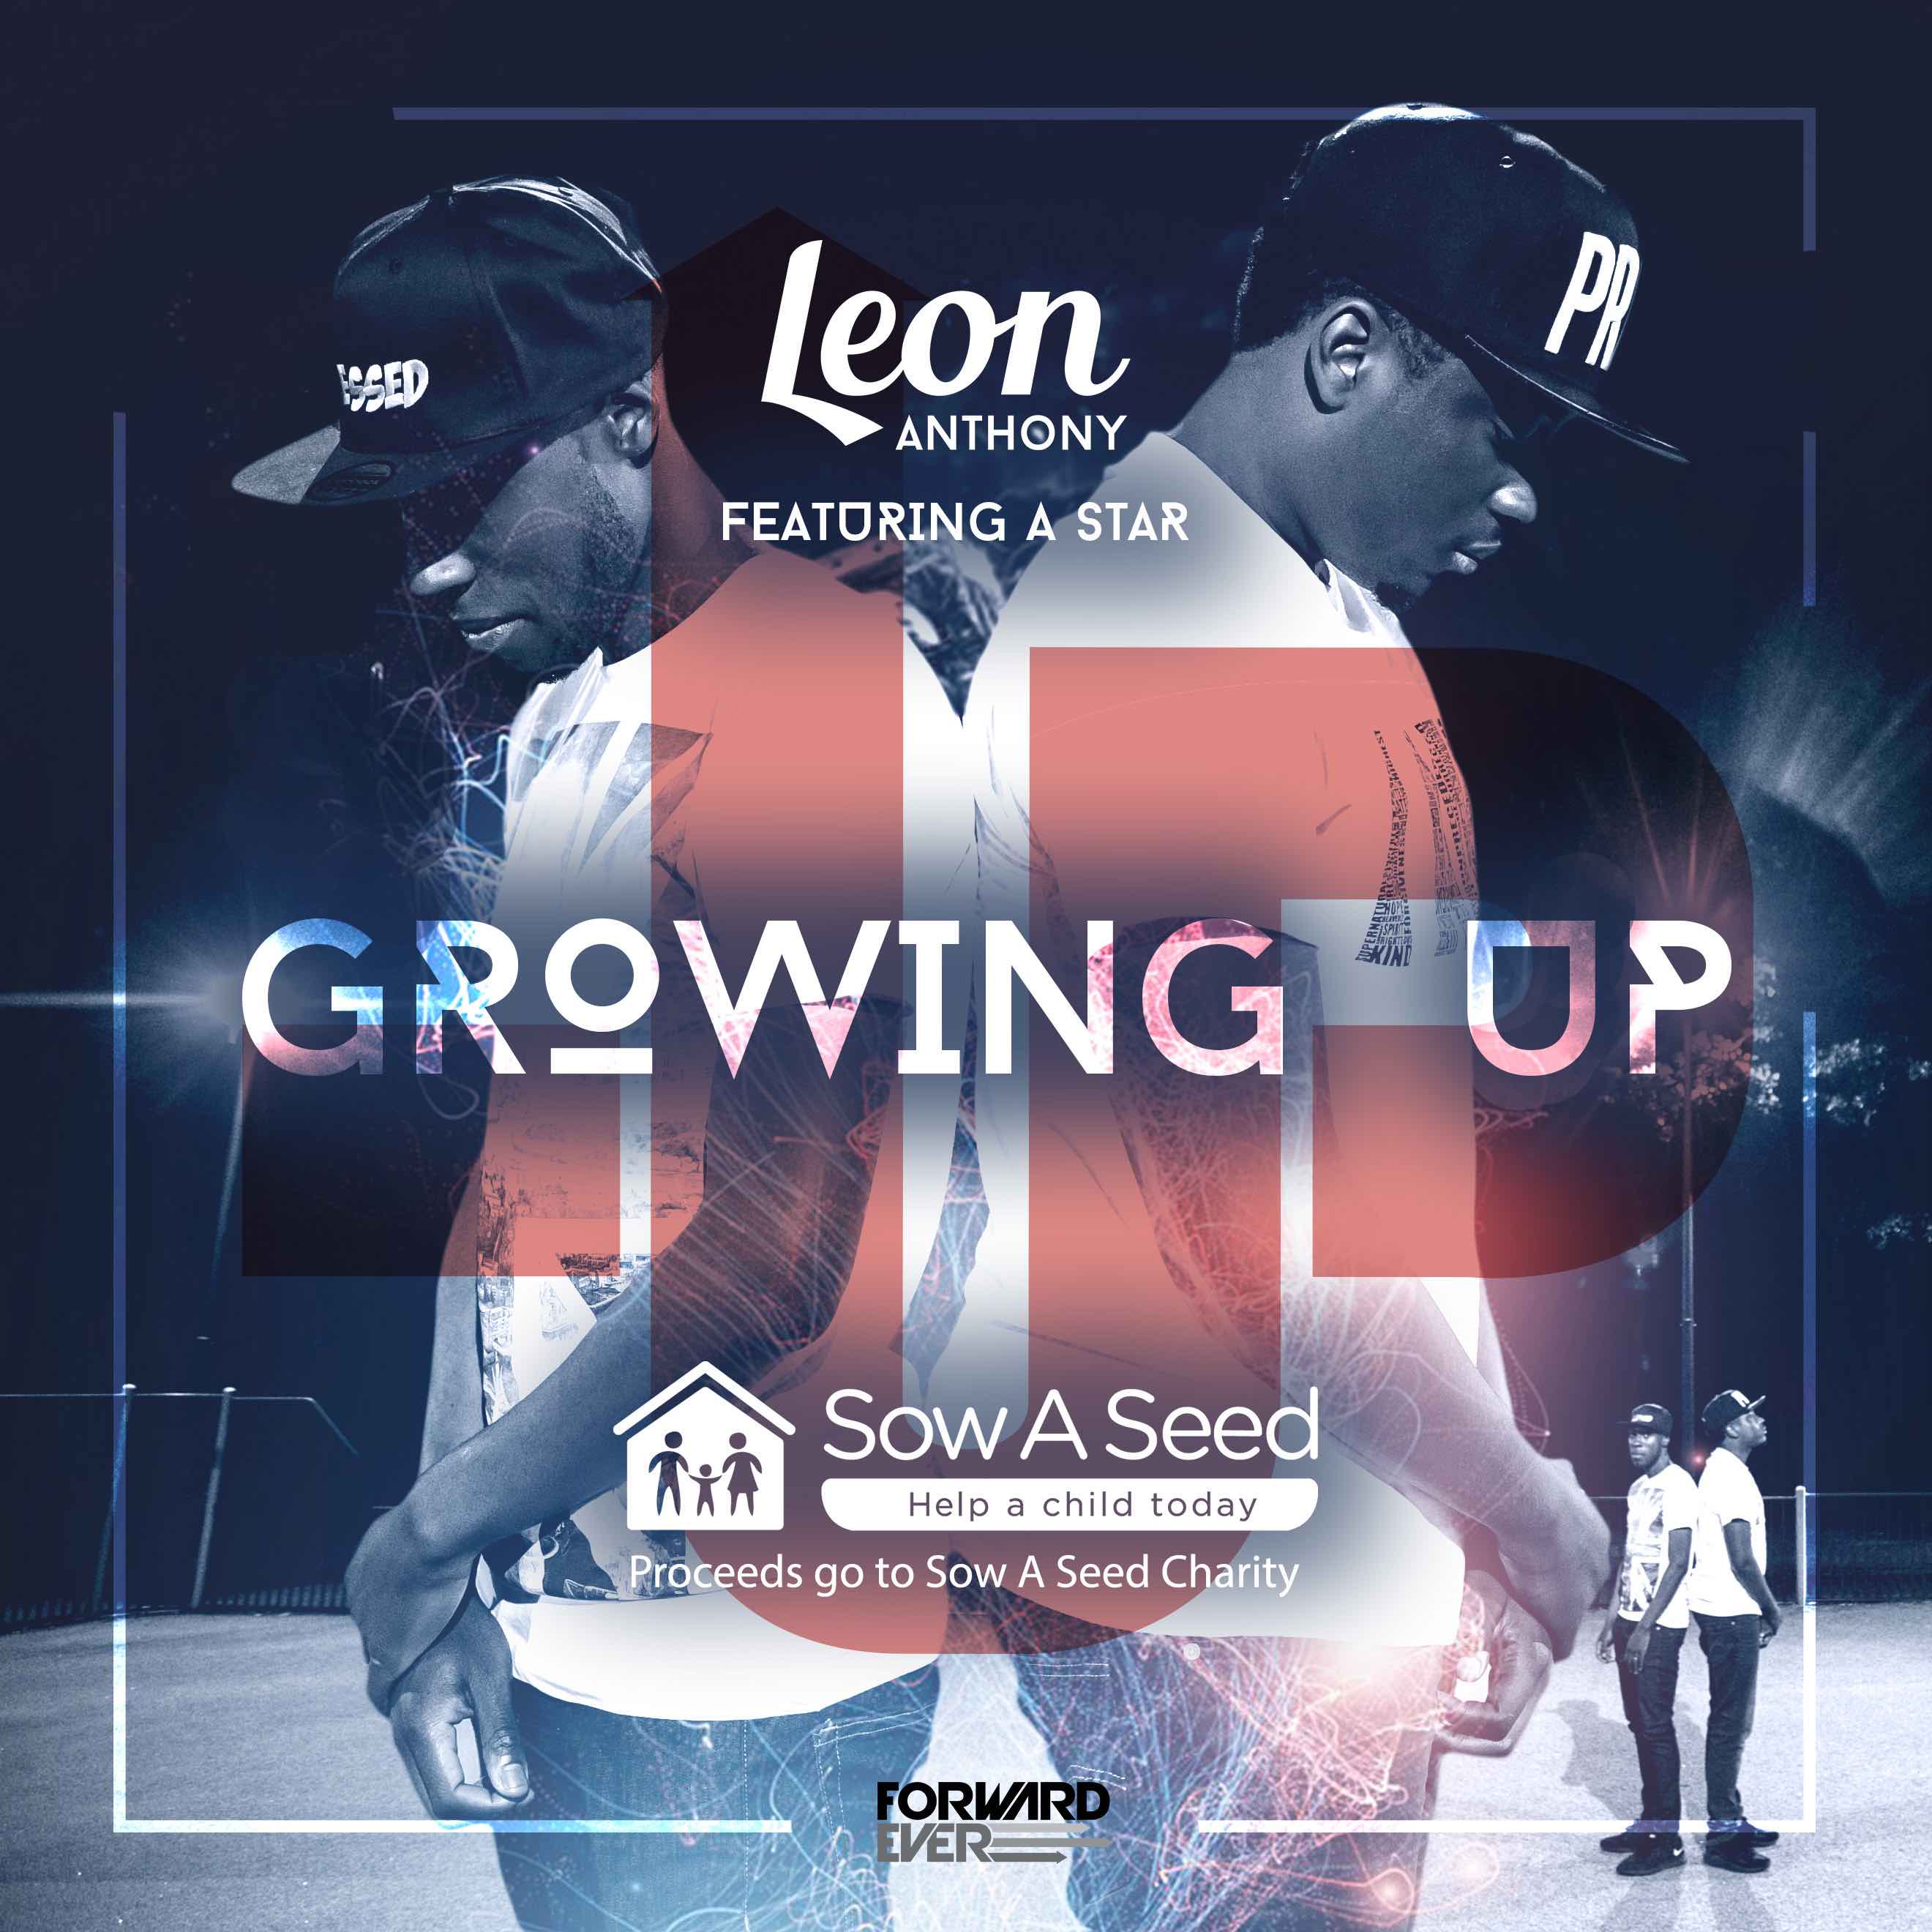 UK Rapper Leon Anthony Debuts ‘Growing Up’ Featuring A Star